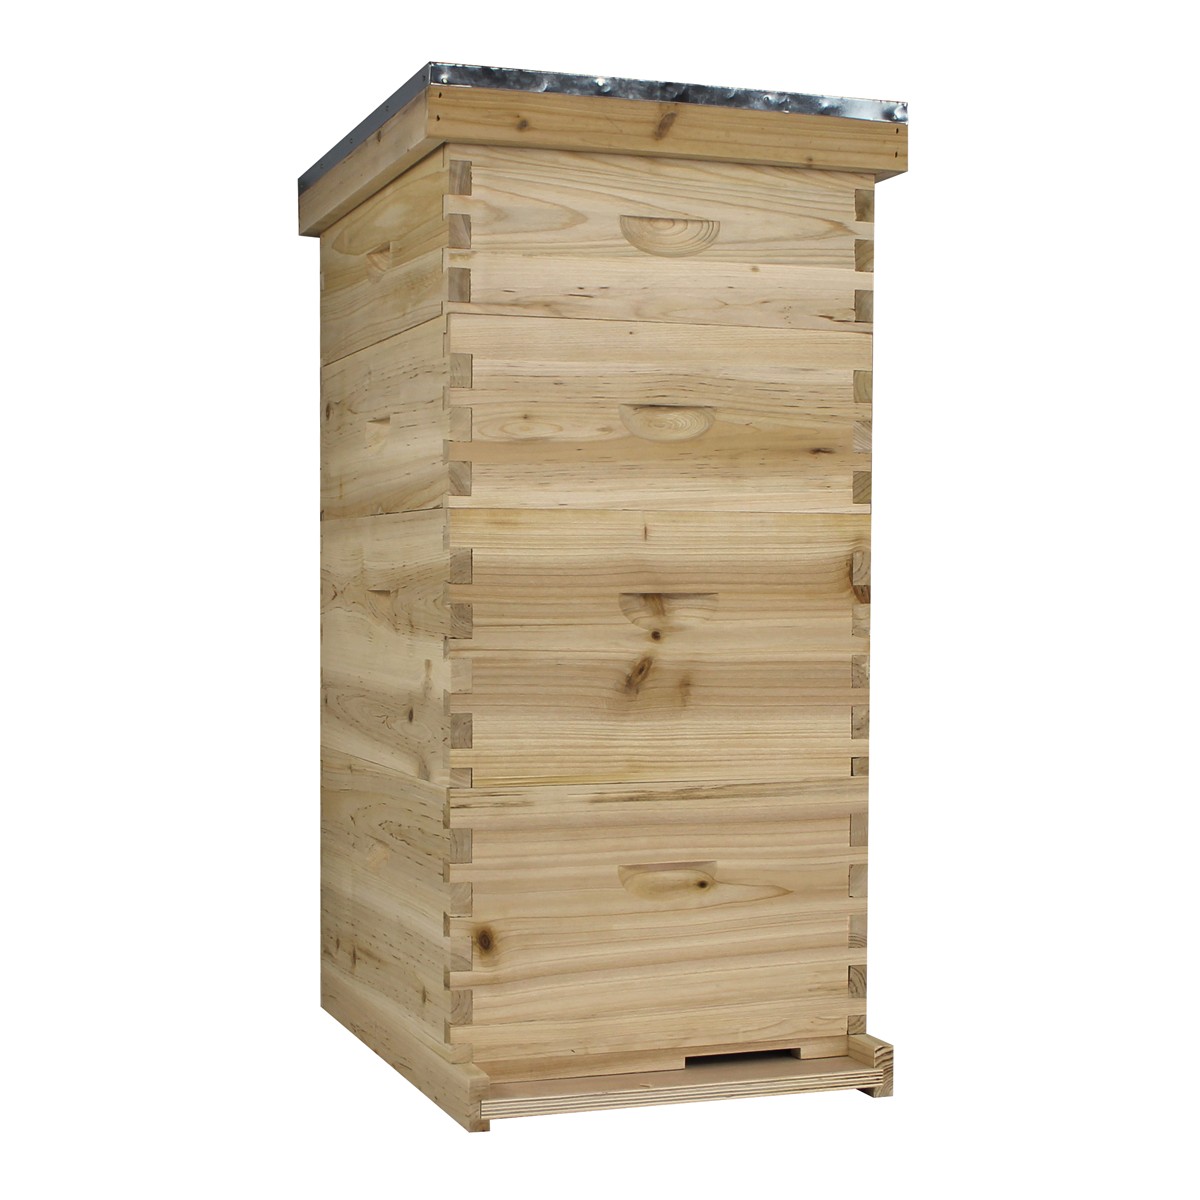 NuBee 10 Frame Beehive With 2 Deep Bee Boxes & 2 Medium Bee Boxes